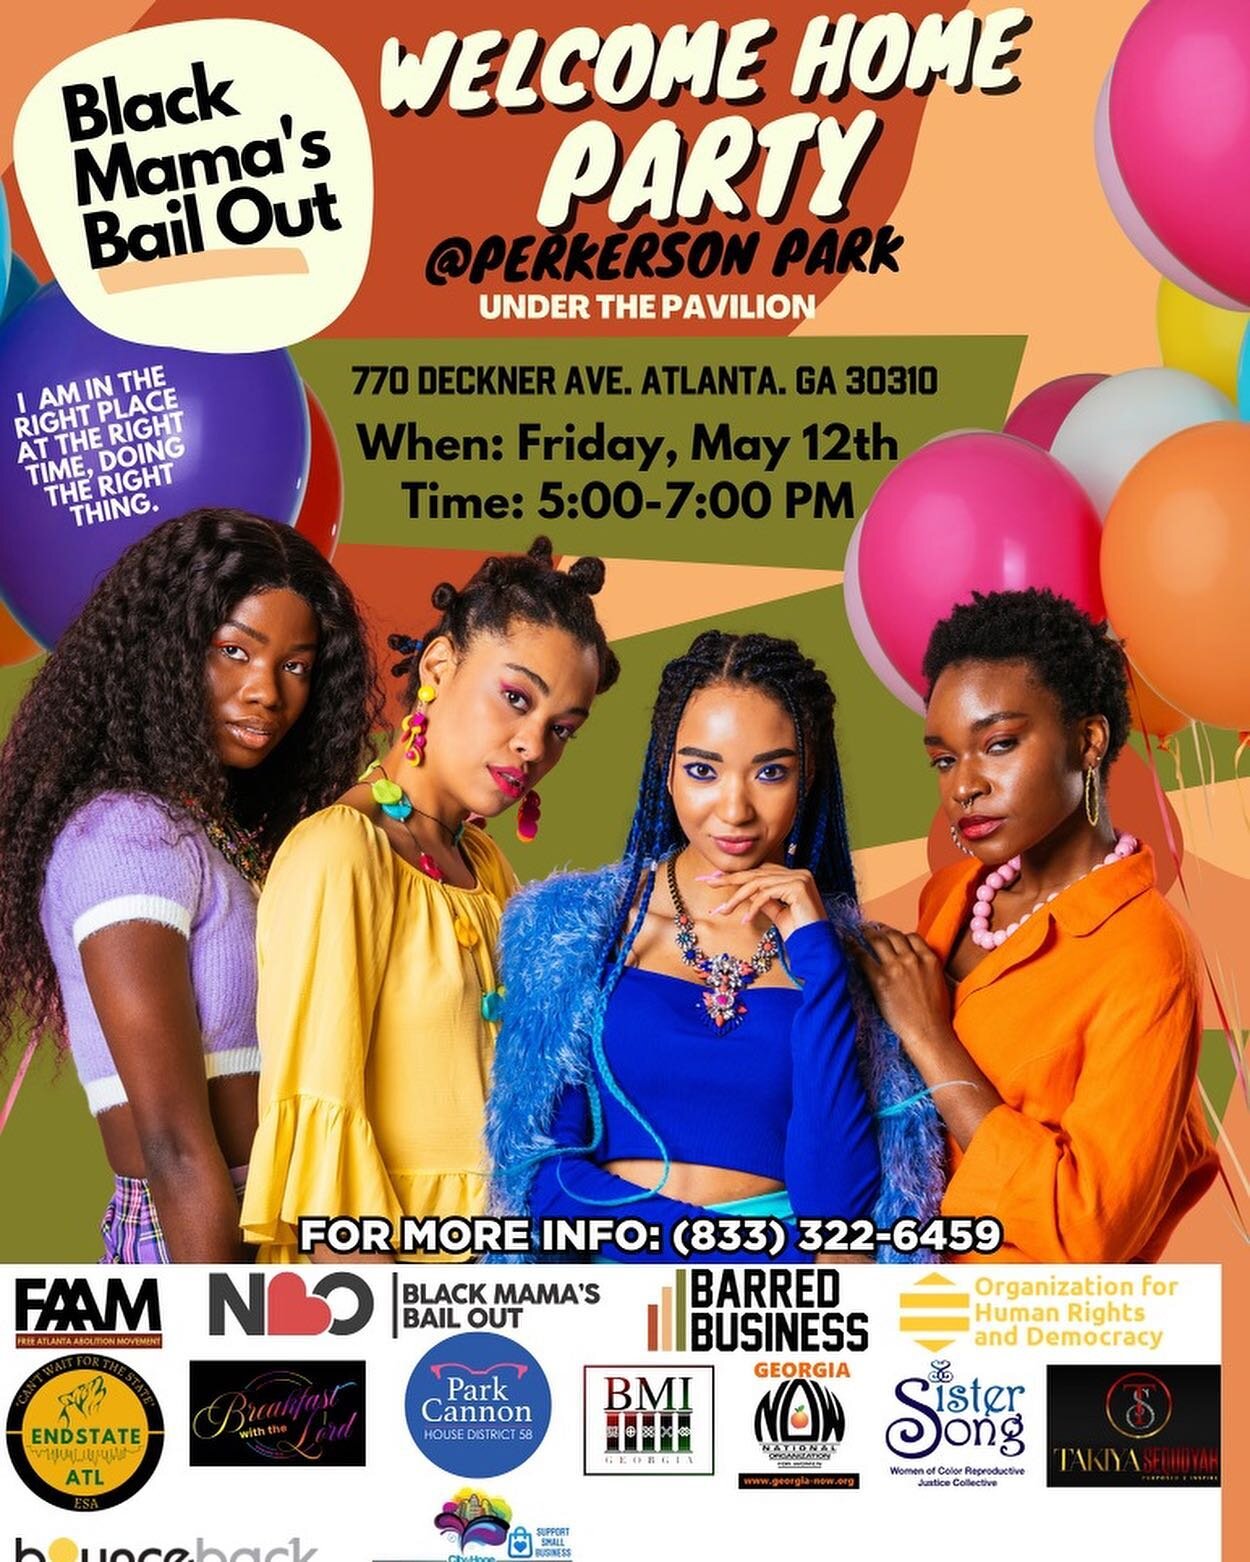 We are SO excited to be partnering again for a #BlackMamasBailOut. Before this Friday, we need YOUR support with donations for the the hygiene baskets that our office will be providing for this dynamic event. Text us at 678-561-0158 when you have you